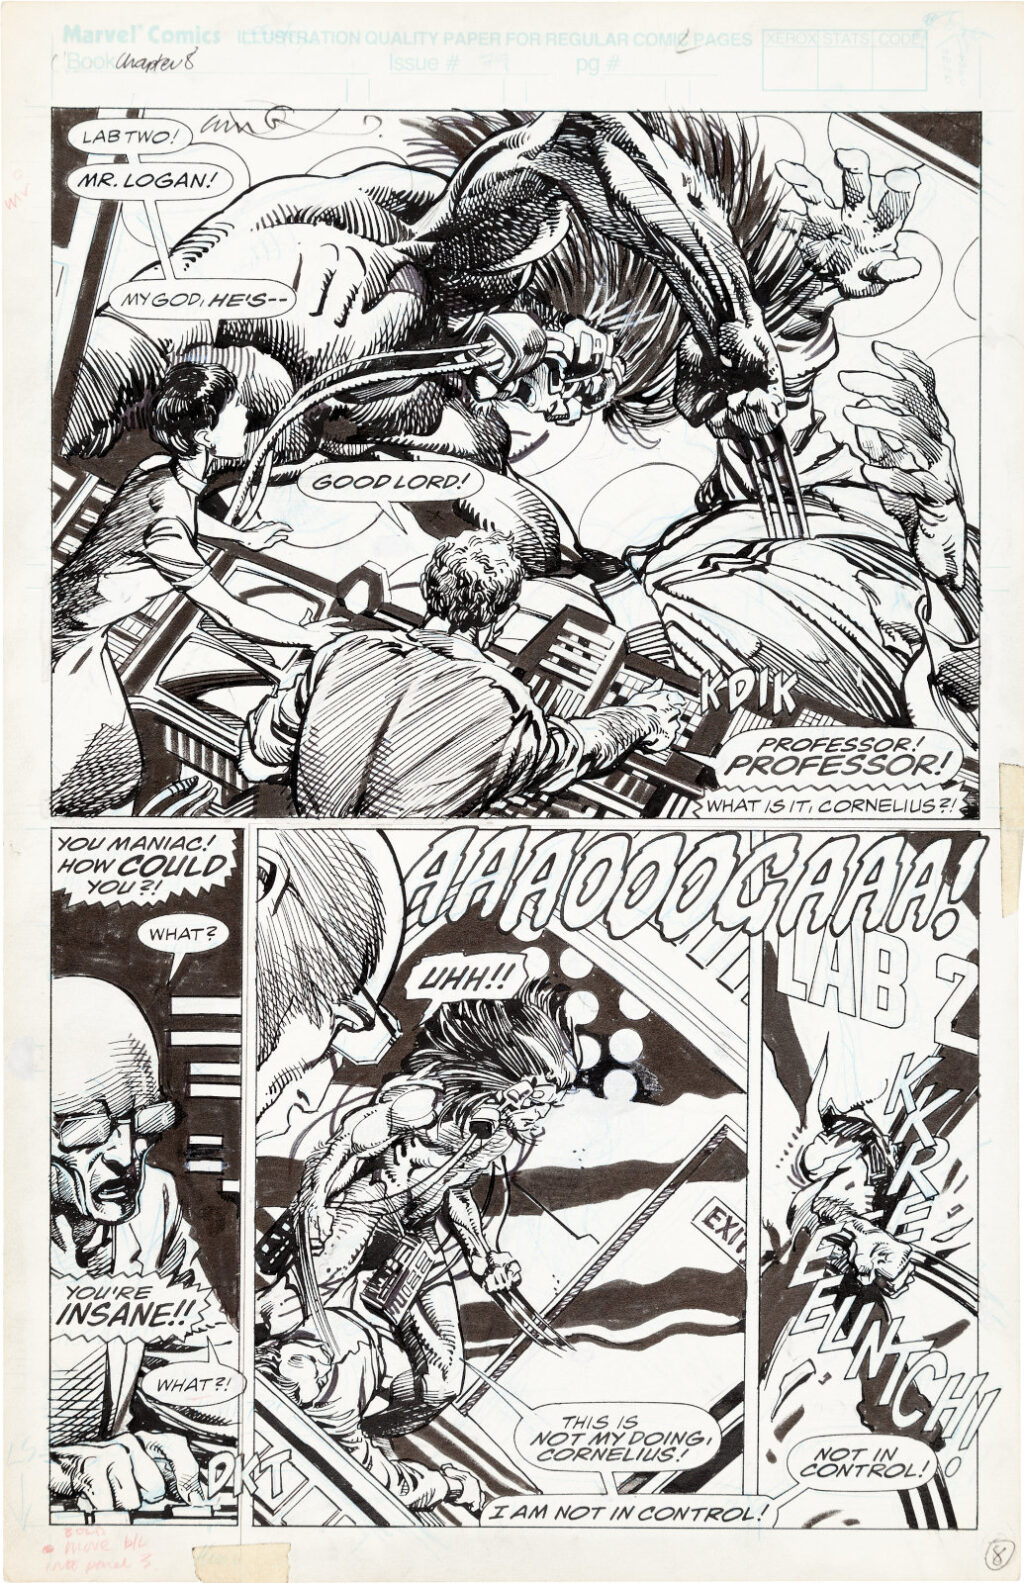 Marvel Comics Presents issue 79 page 8 by Barry Windsor Smith